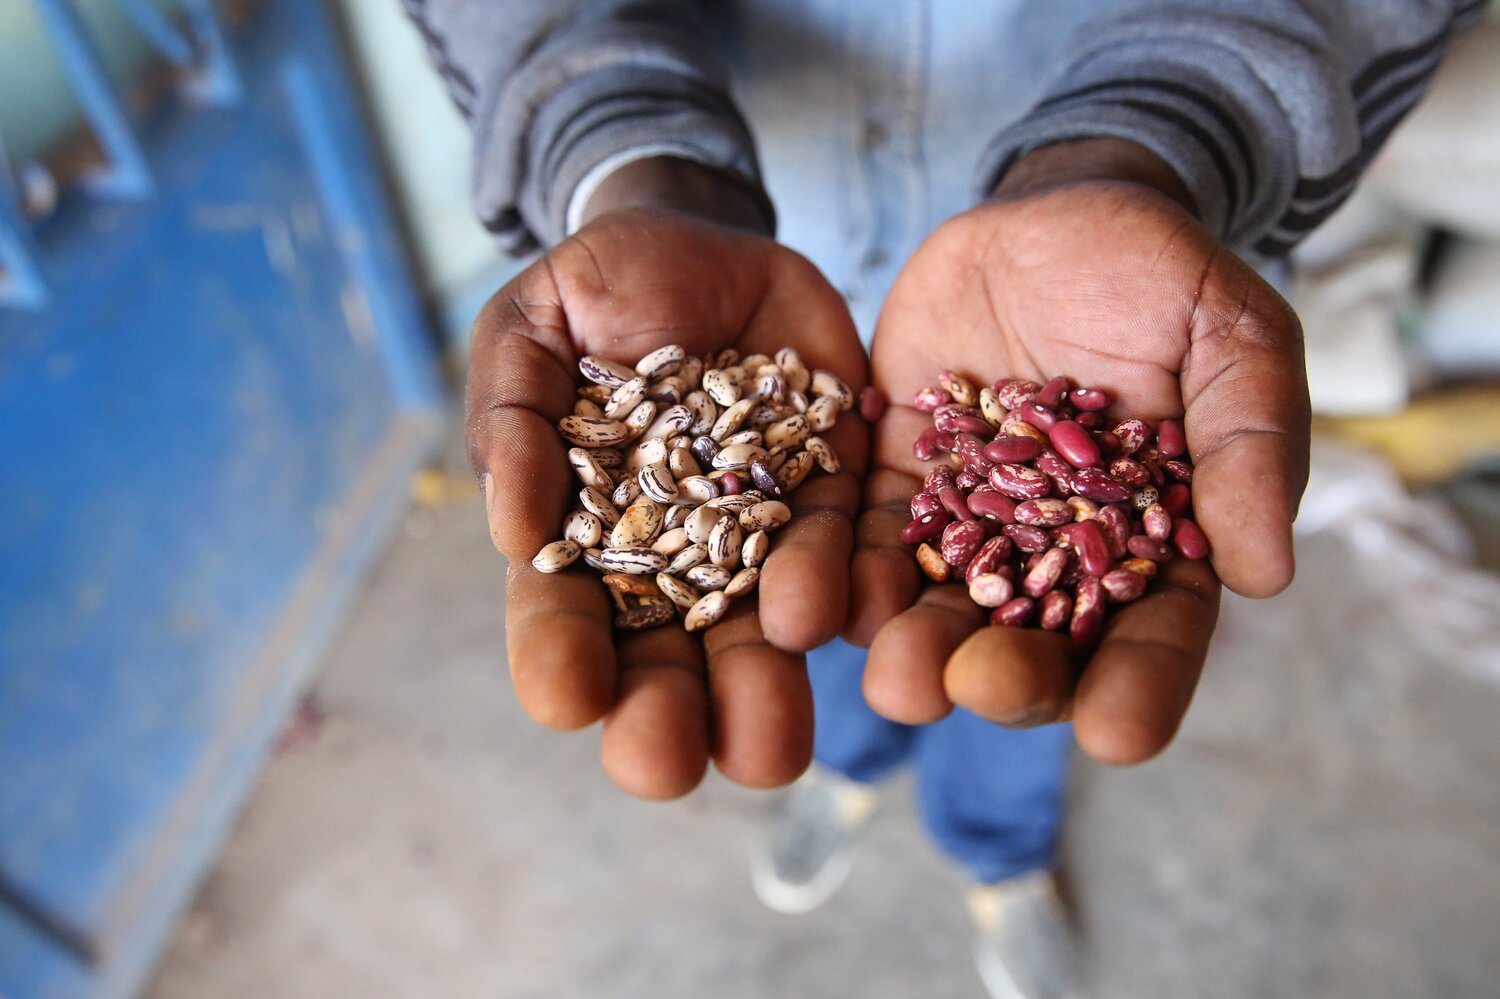 Two varieties of biofortified beans from eastern Rwanda. Photo: LM Salazar for #CropsInColor